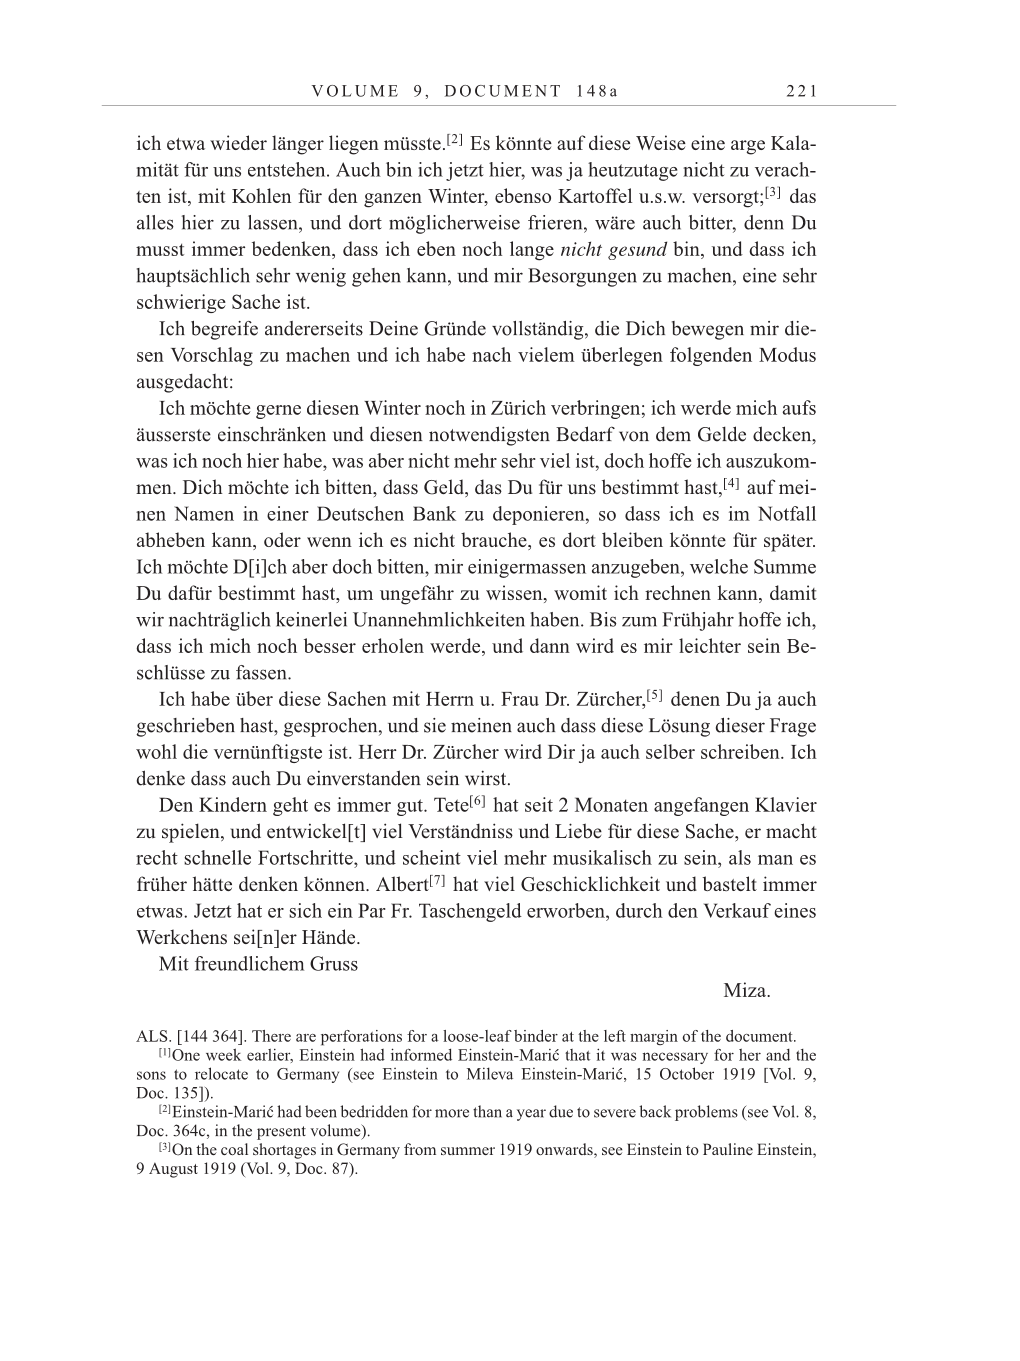 Volume 10: The Berlin Years: Correspondence May-December 1920 / Supplementary Correspondence 1909-1920 page 221